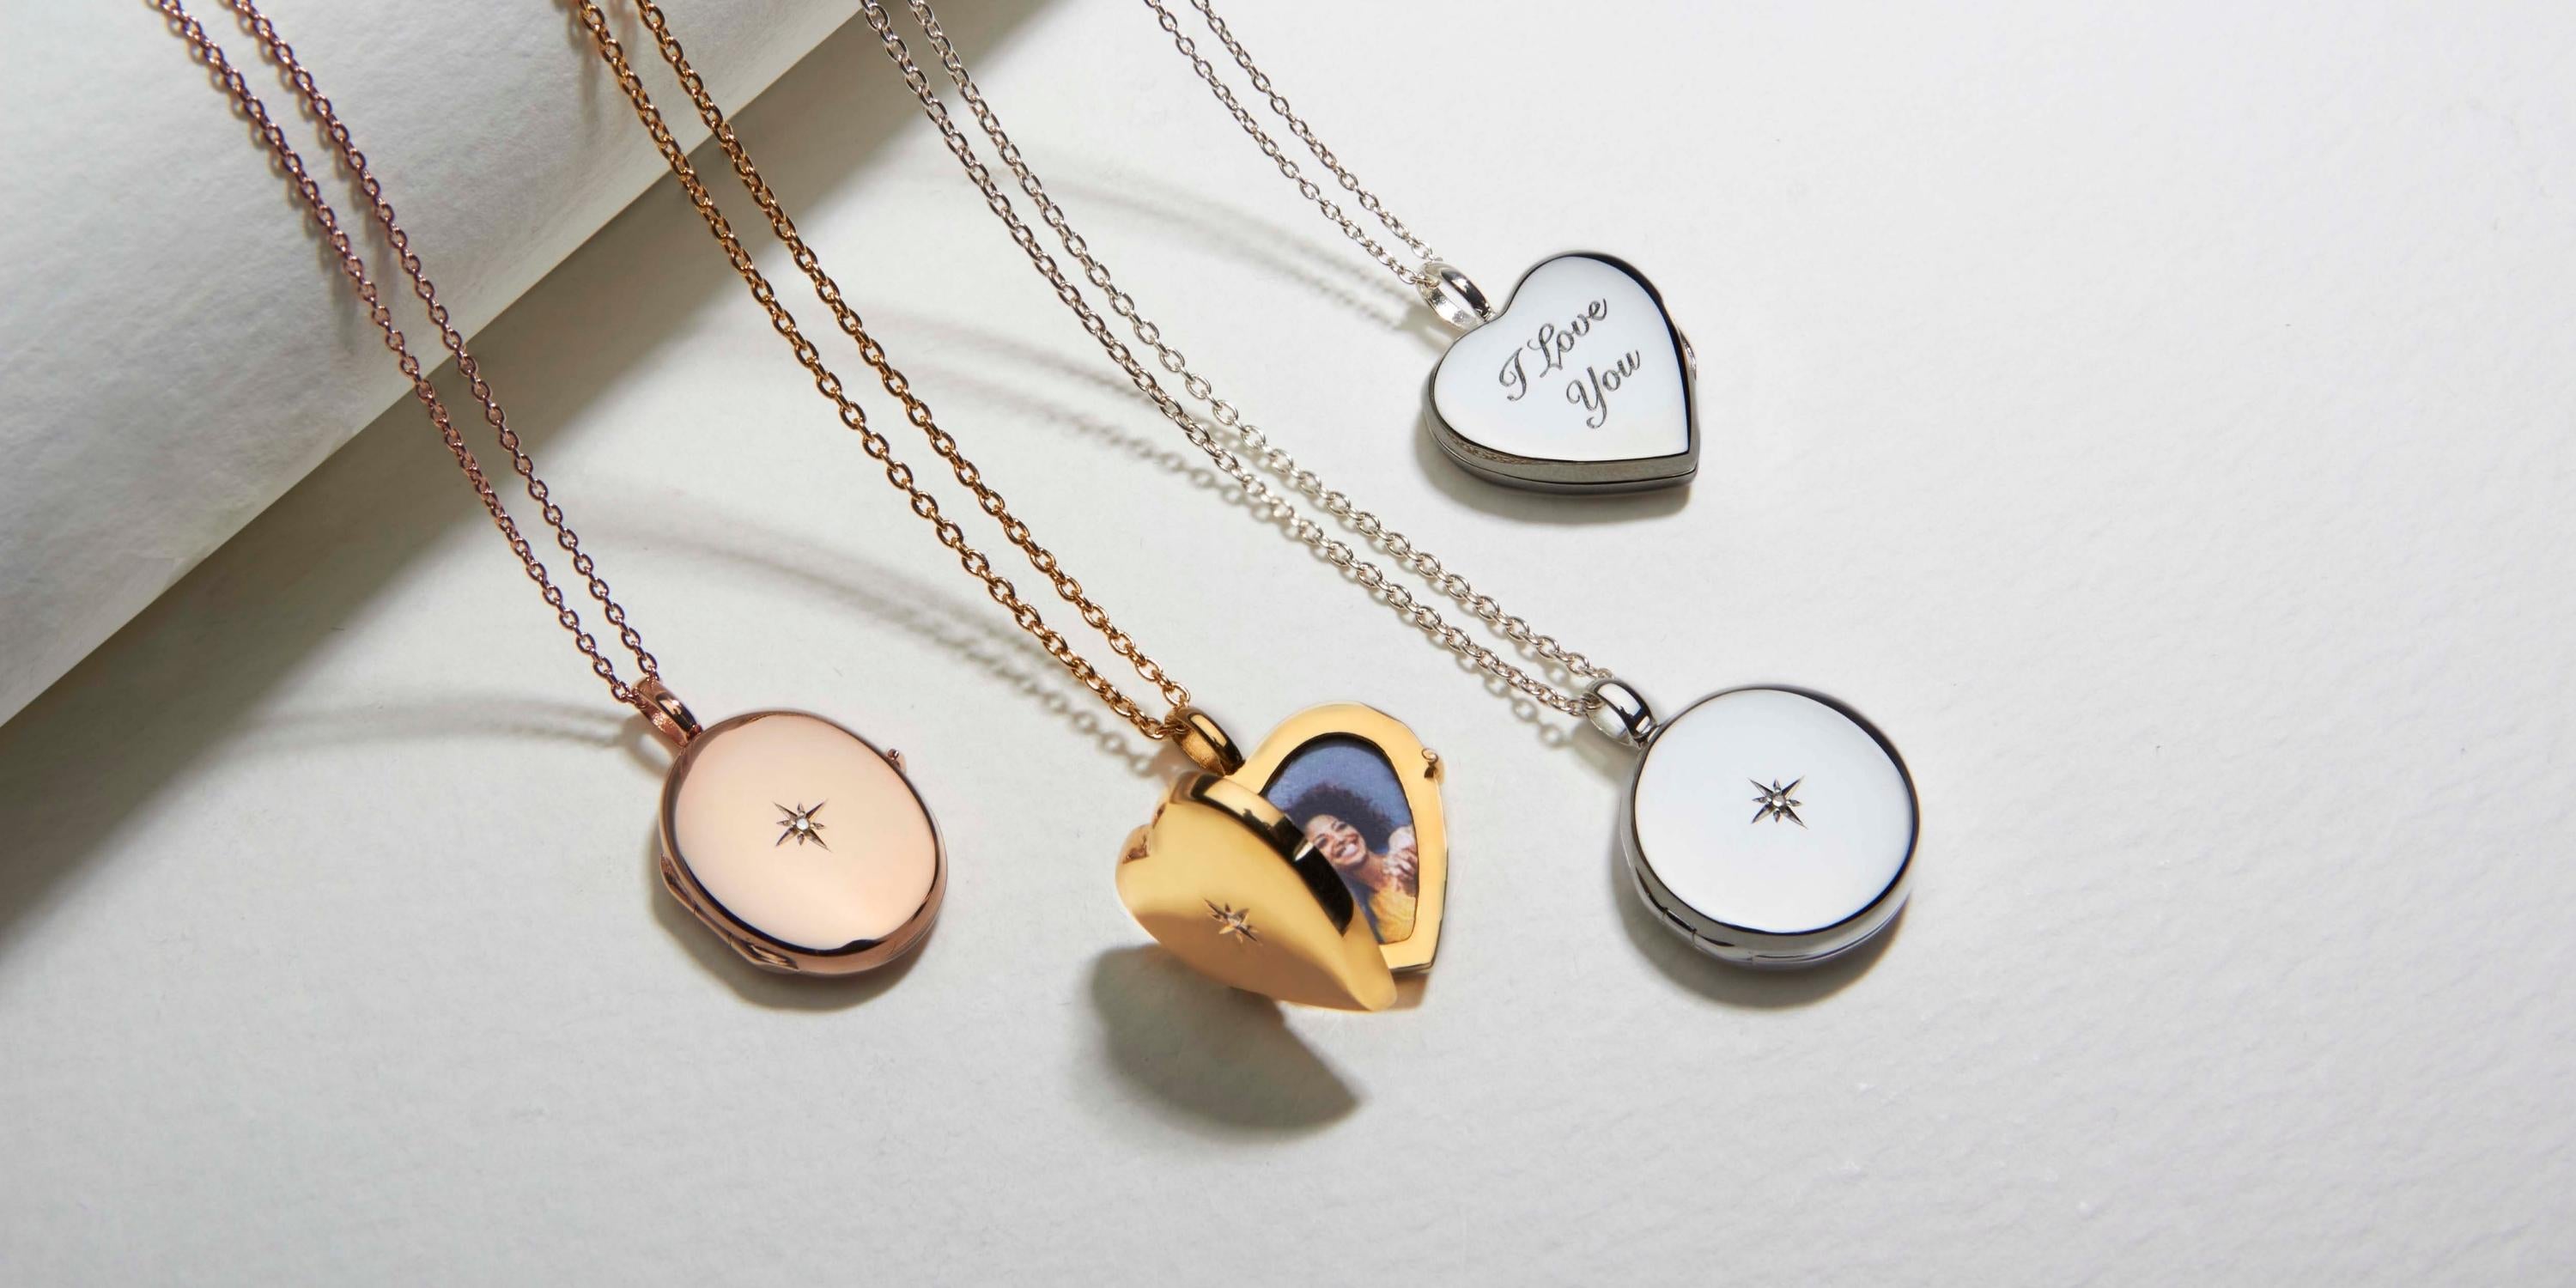 Diamond Locket Necklace For Her Engraved With Photos